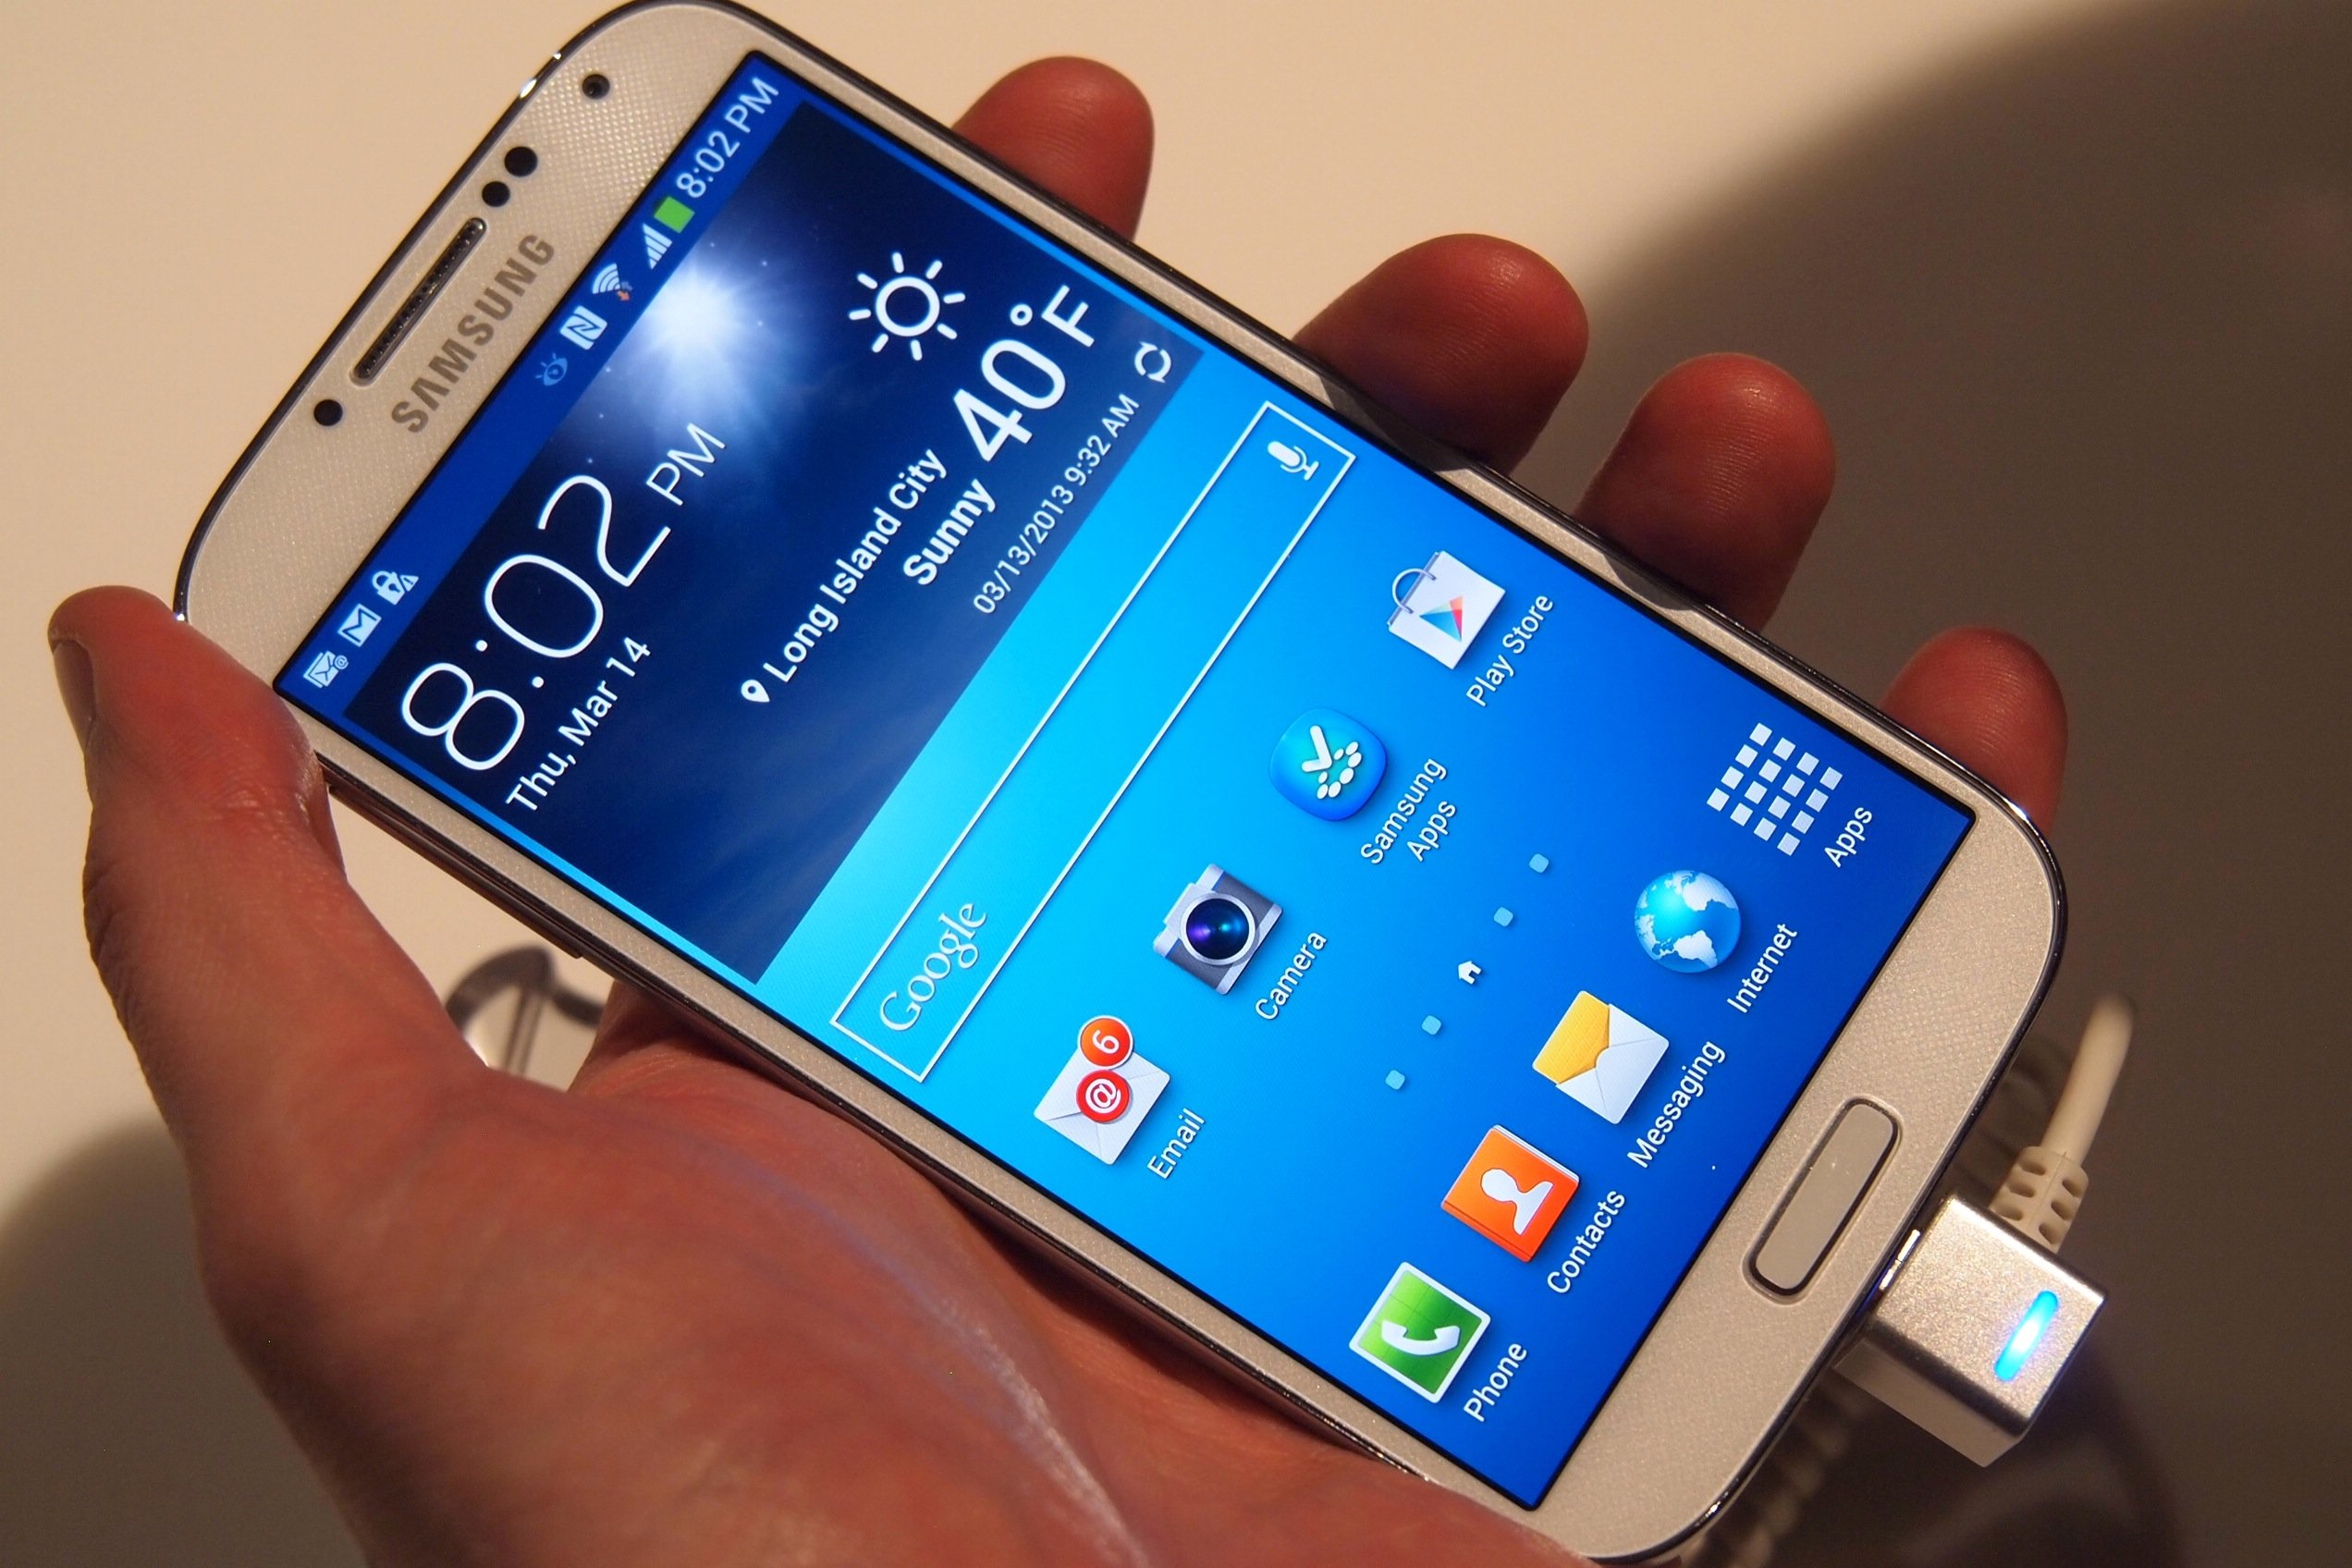 How to fix flash player on Samsung Galaxy S4